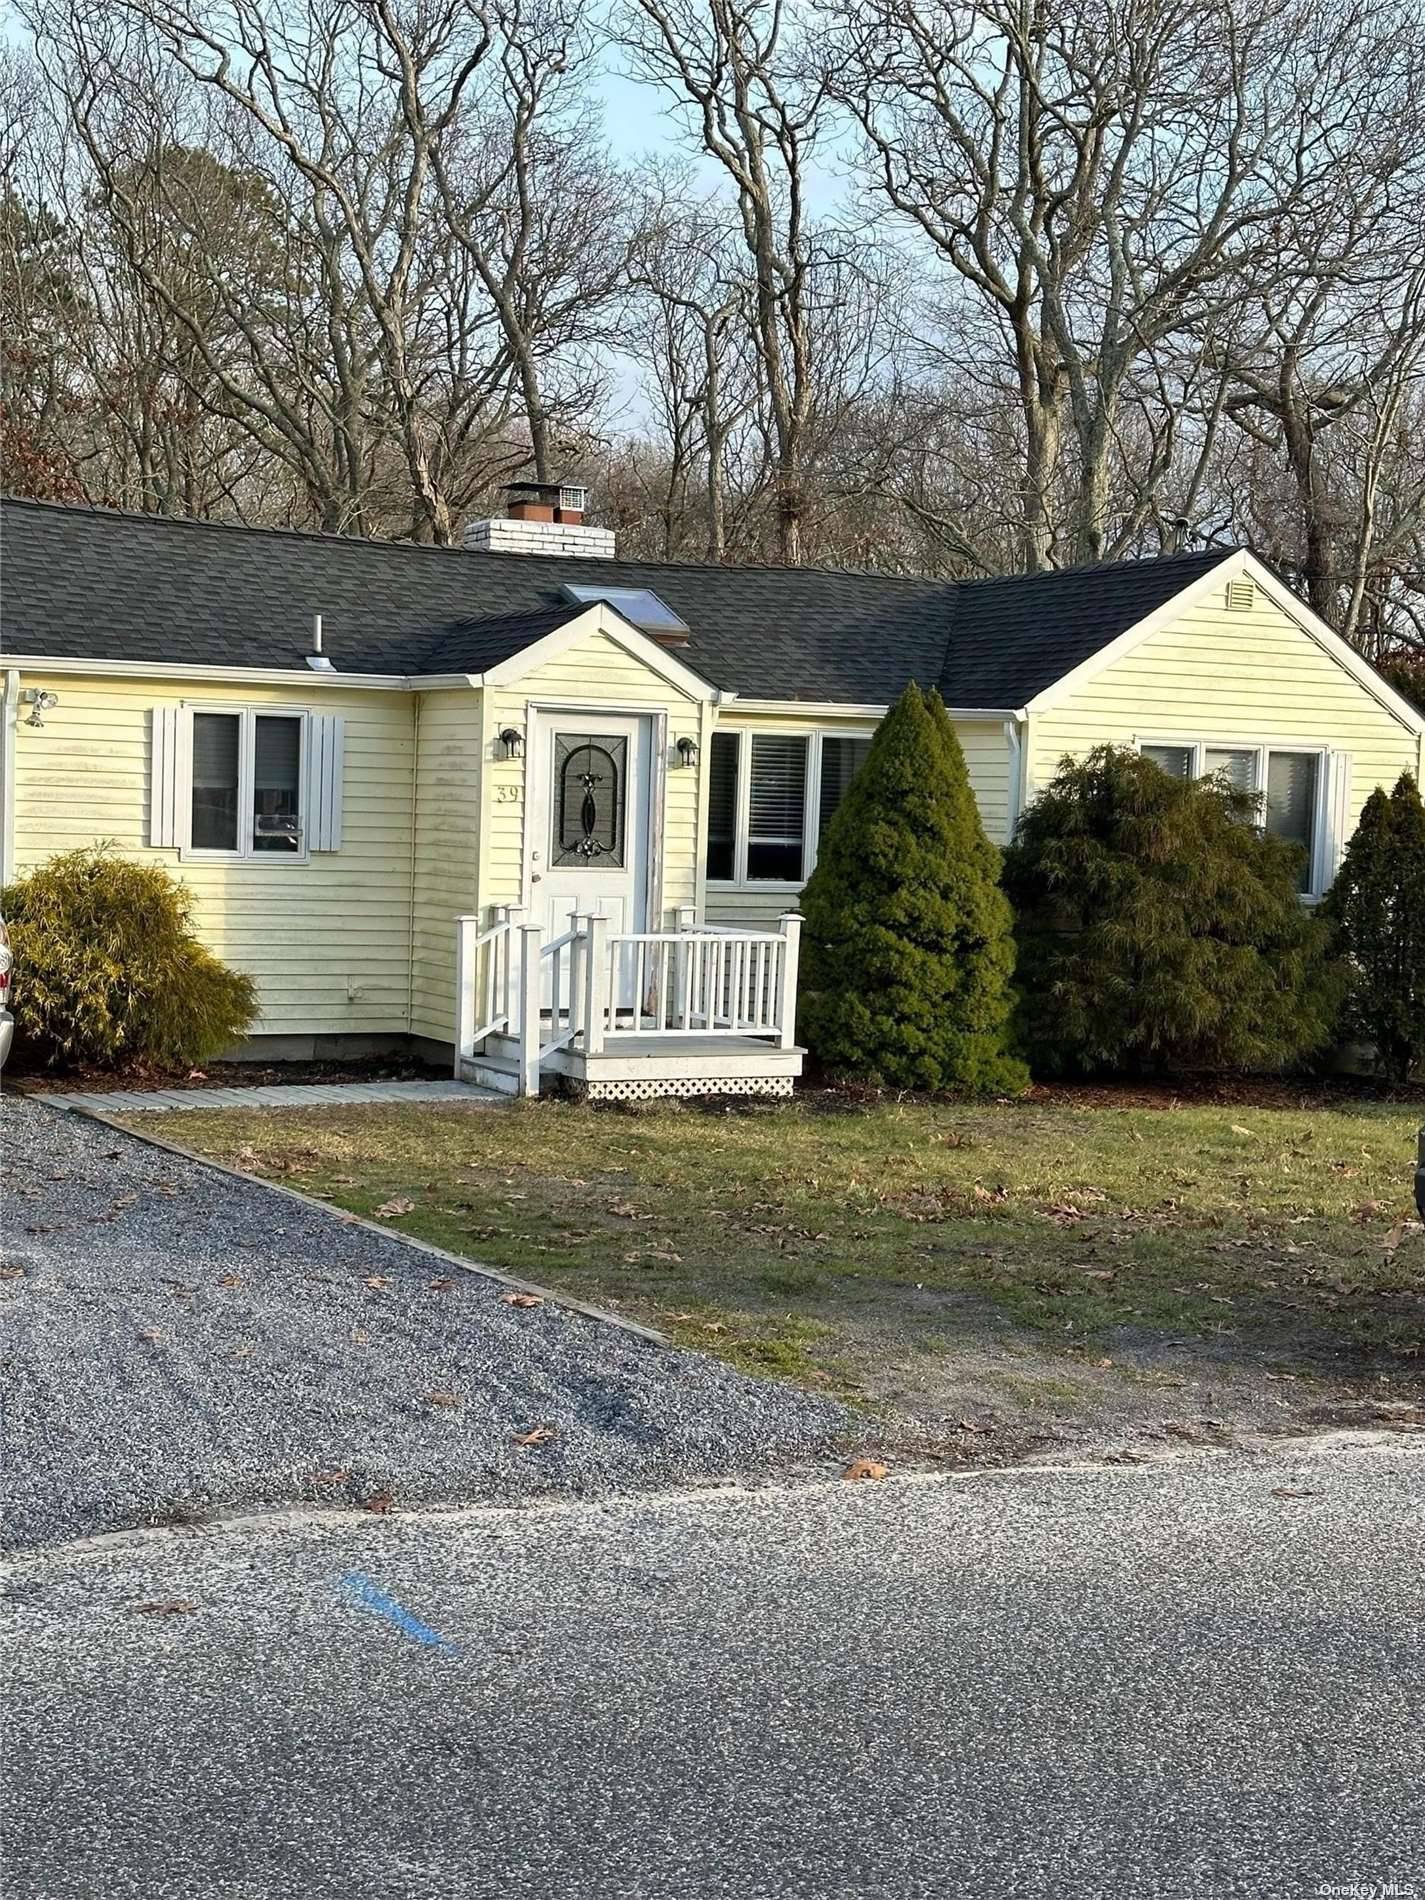 Fabulous Seasonal Rental in Prime Location around corner from Shinnecock Bay Beach and down street from the Ponquogue Bridge and Ocean Beaches.